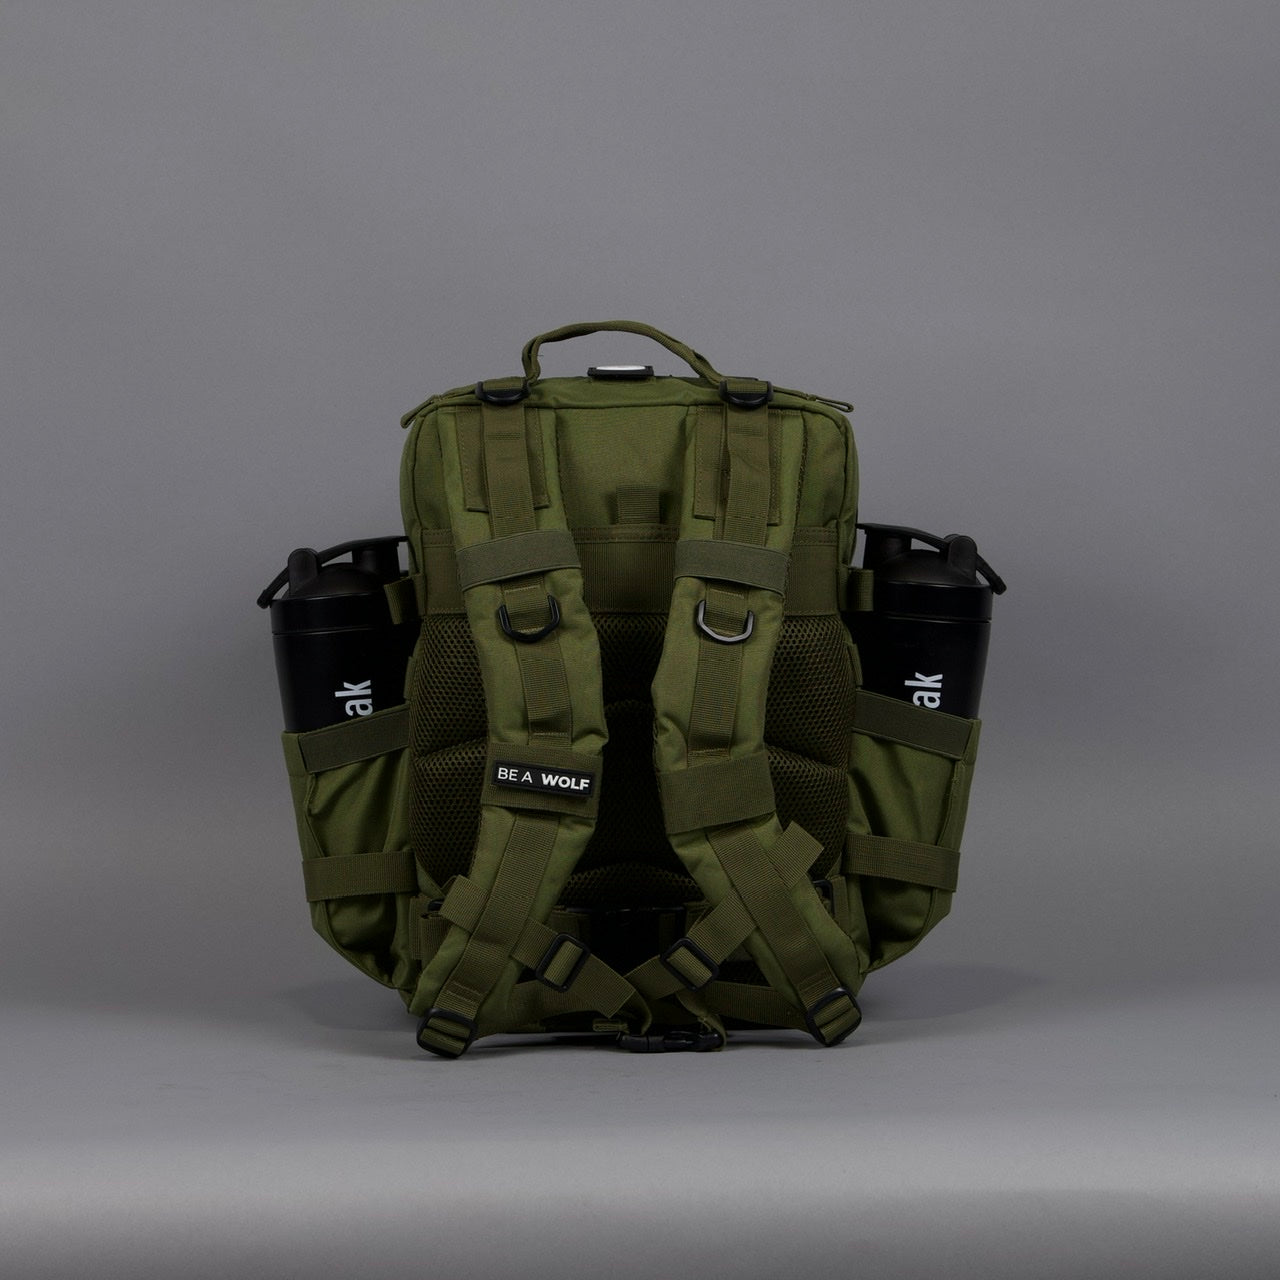 25L Backpack Athletic Green